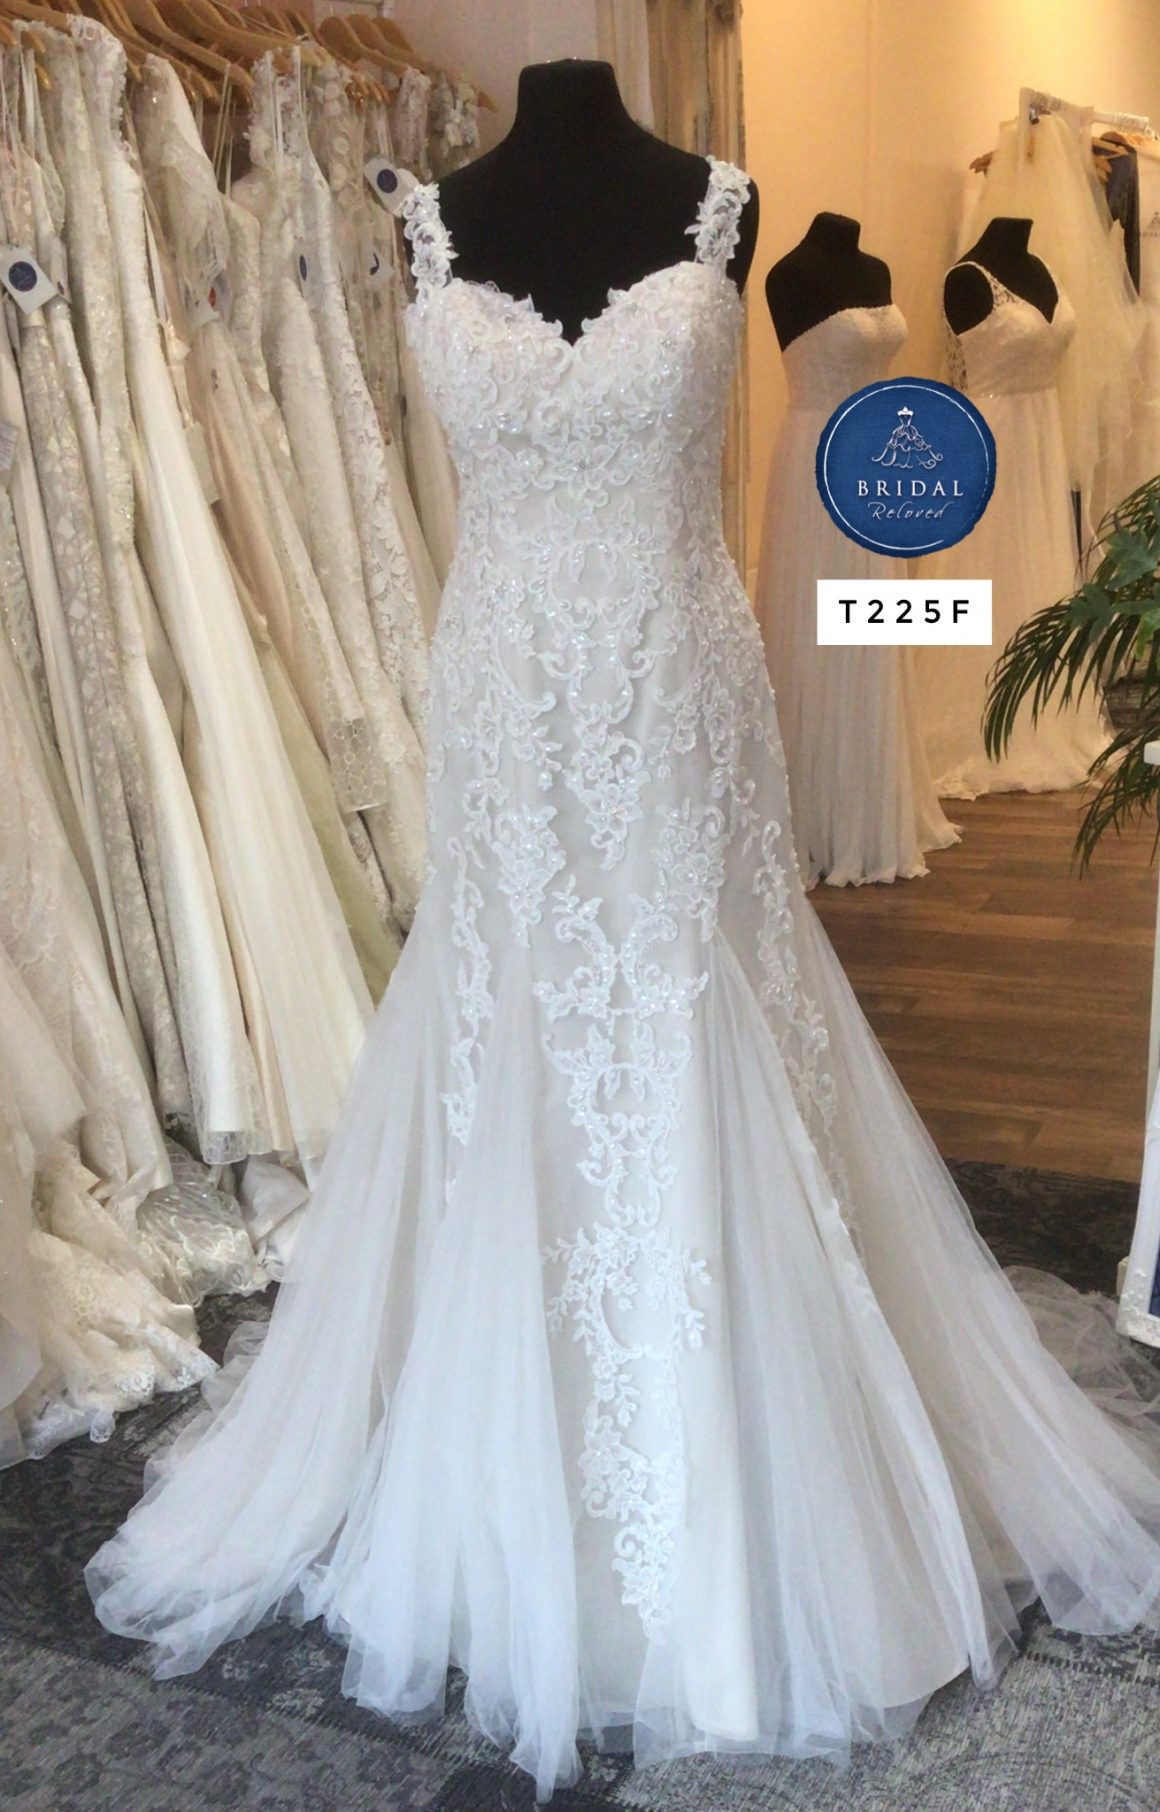 Charlotte Balbier | Wedding Dress | Fit to Flare | T225F